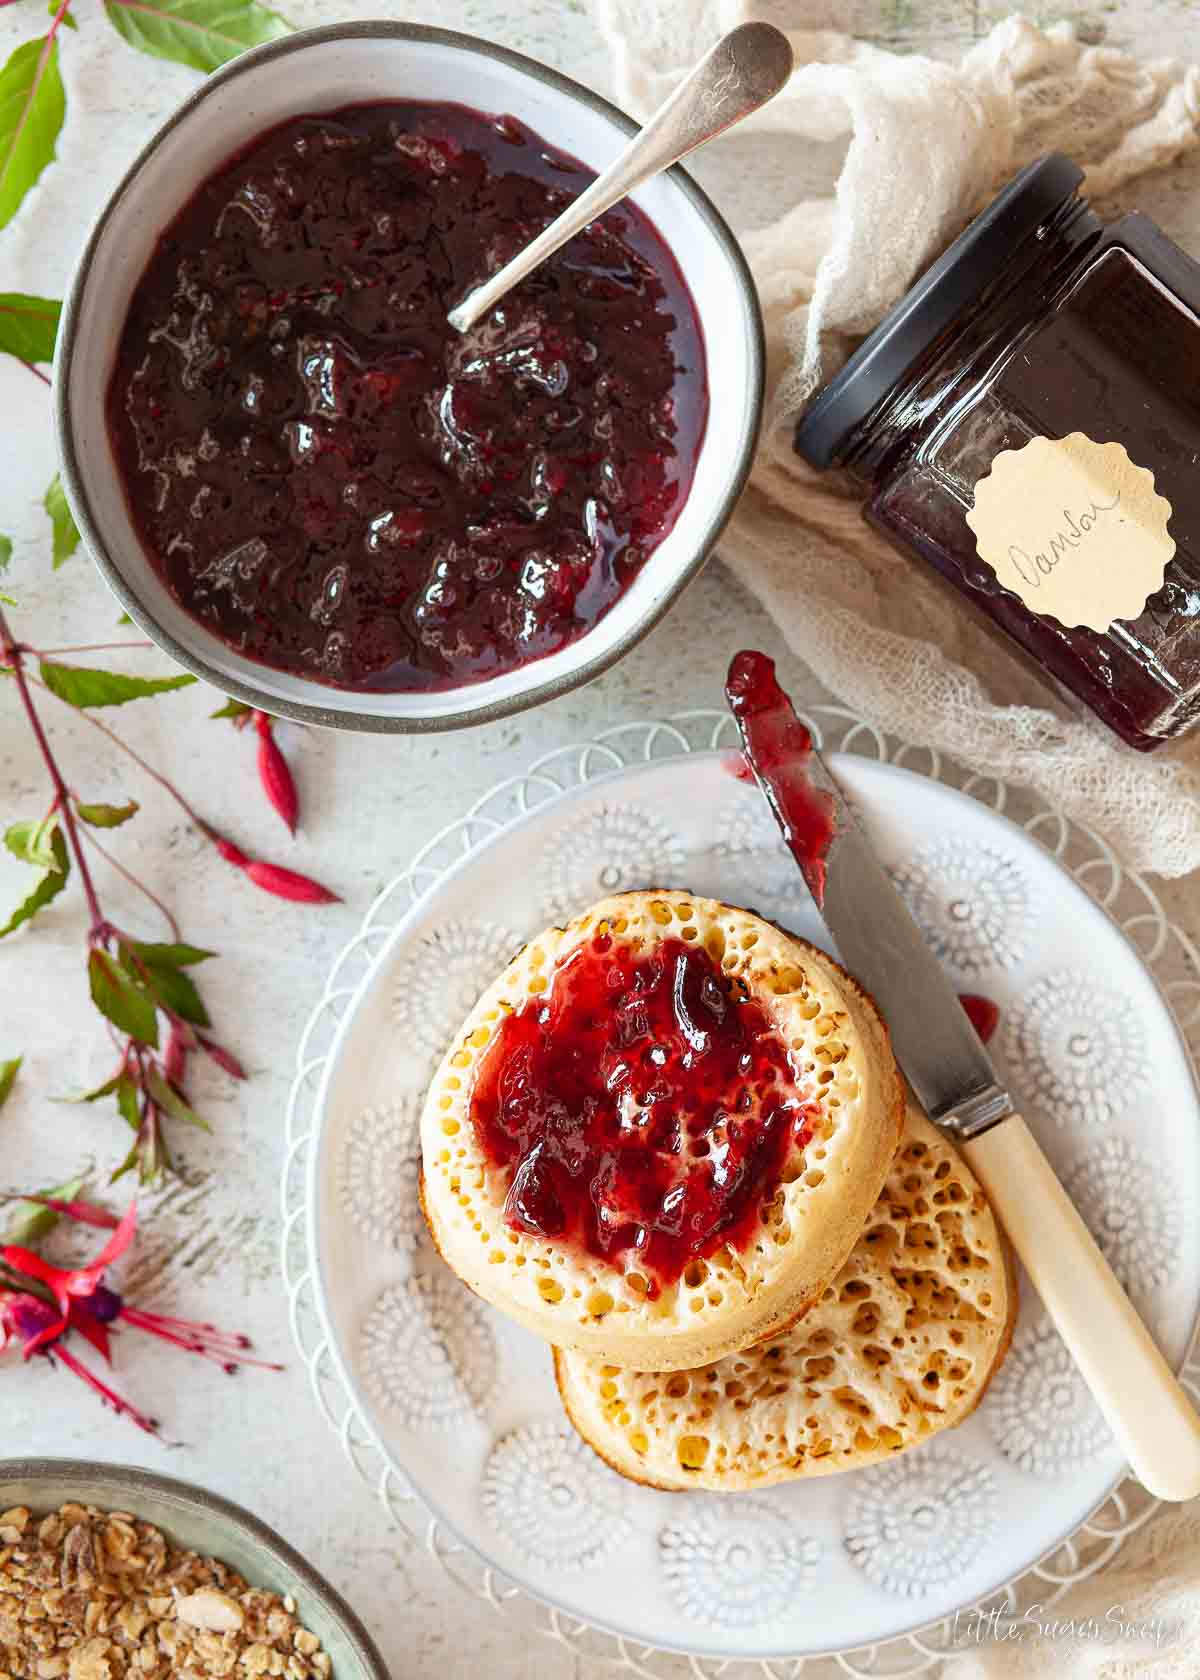 Damson jam spread on crumpets with a bowl of jam alongside.